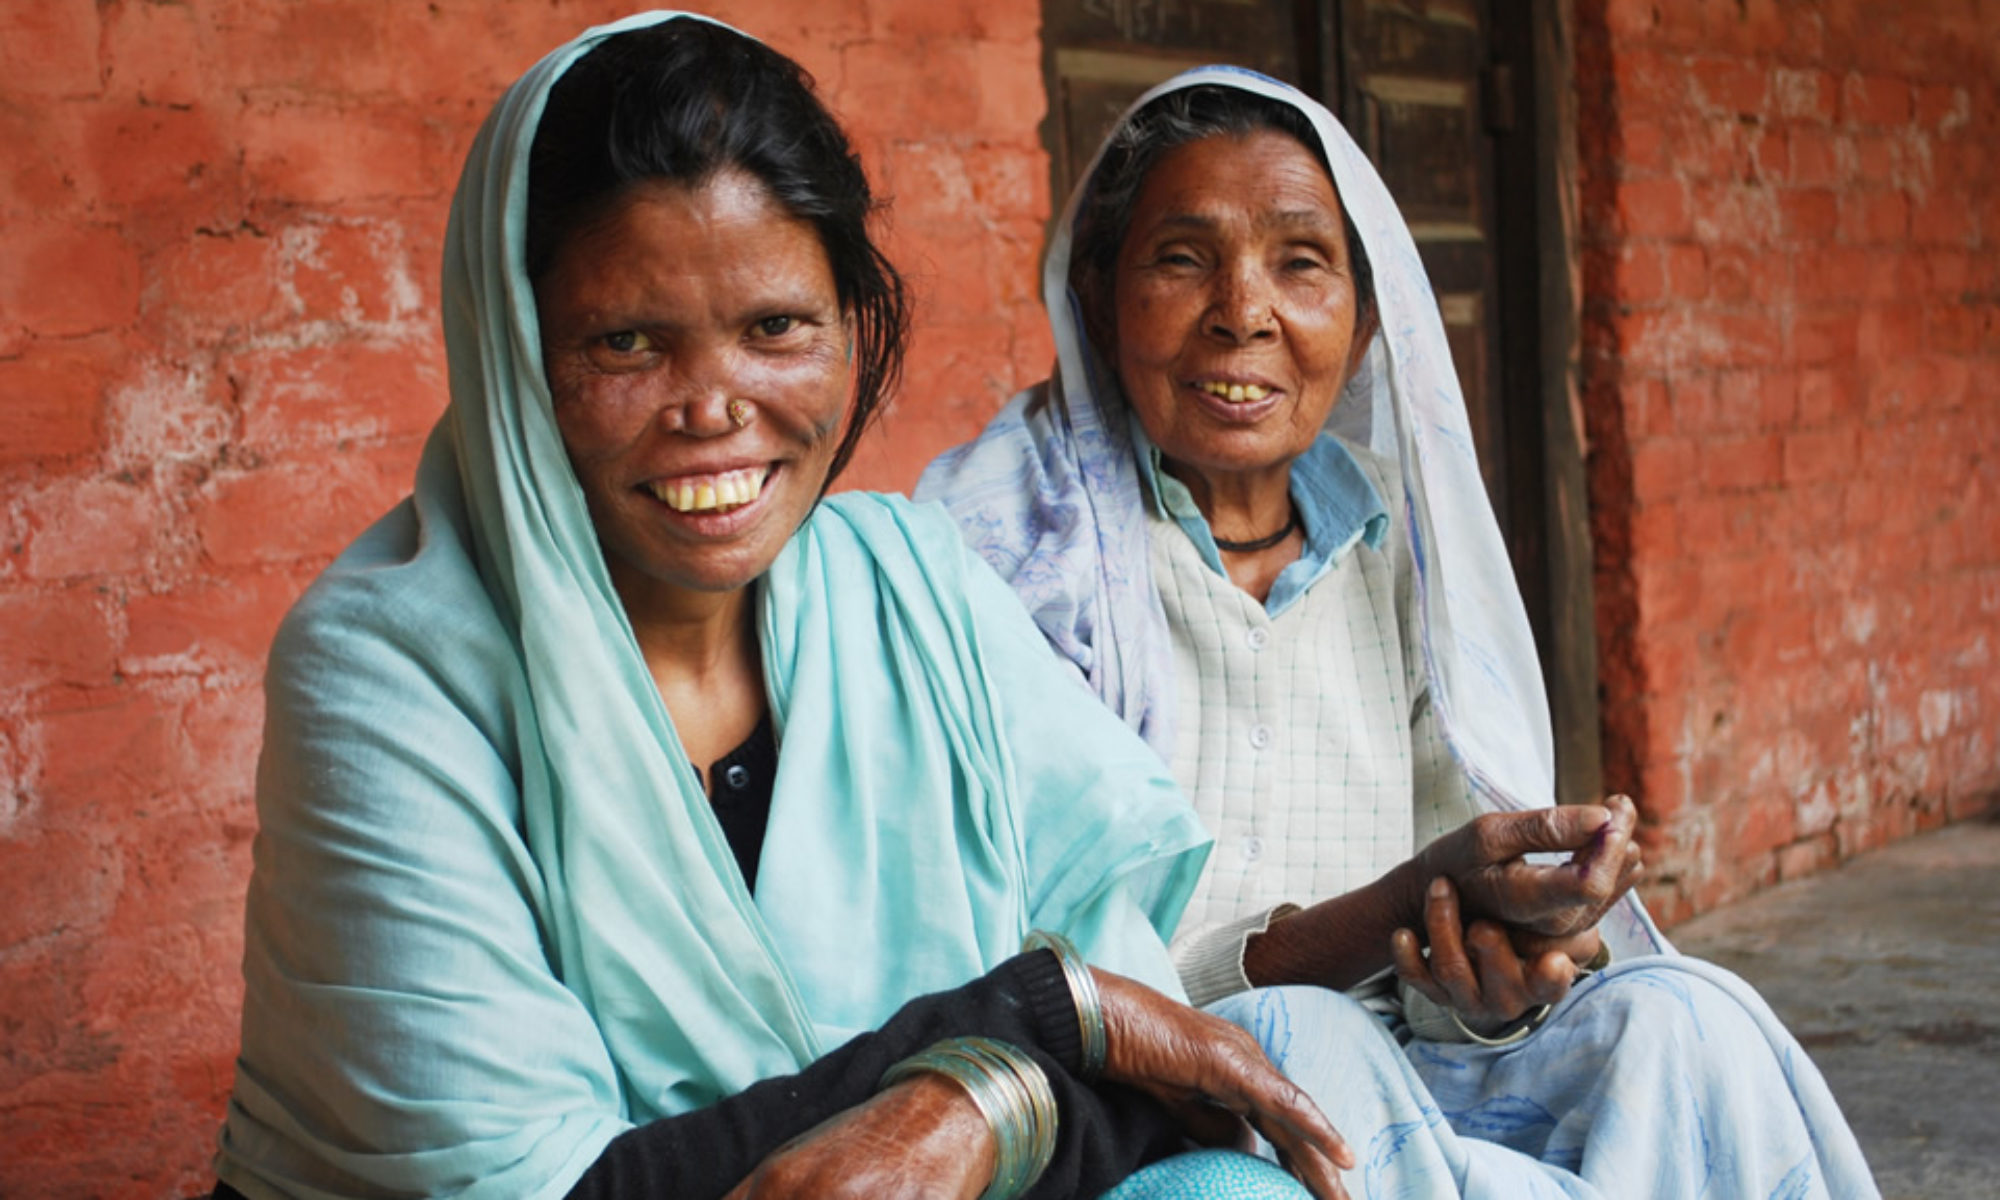 The Leprosy Mission Almora